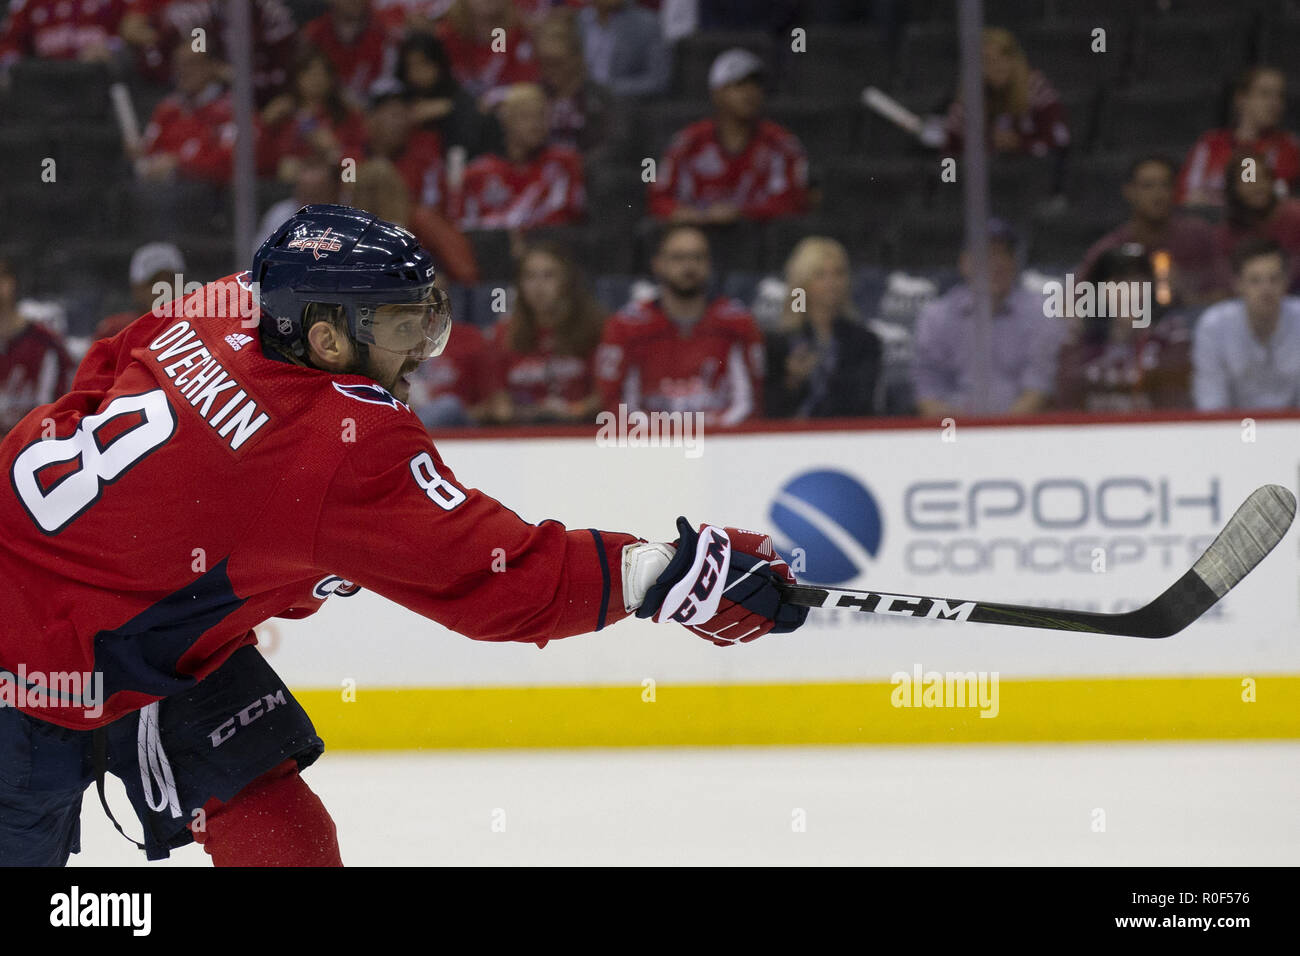 Washington, DC, USA. 3rd Oct, 2018. Washington Capitals left wing Alex Ovechkin (8) shoots during the game between the Boston Bruins and Washington Capitals at Capitol One Arena in Washington, DC on October 3, 2018. The Washington Capitals won the 2018 Stanley Cup. Credit: Alex Edelman/ZUMA Wire/Alamy Live News Stock Photo